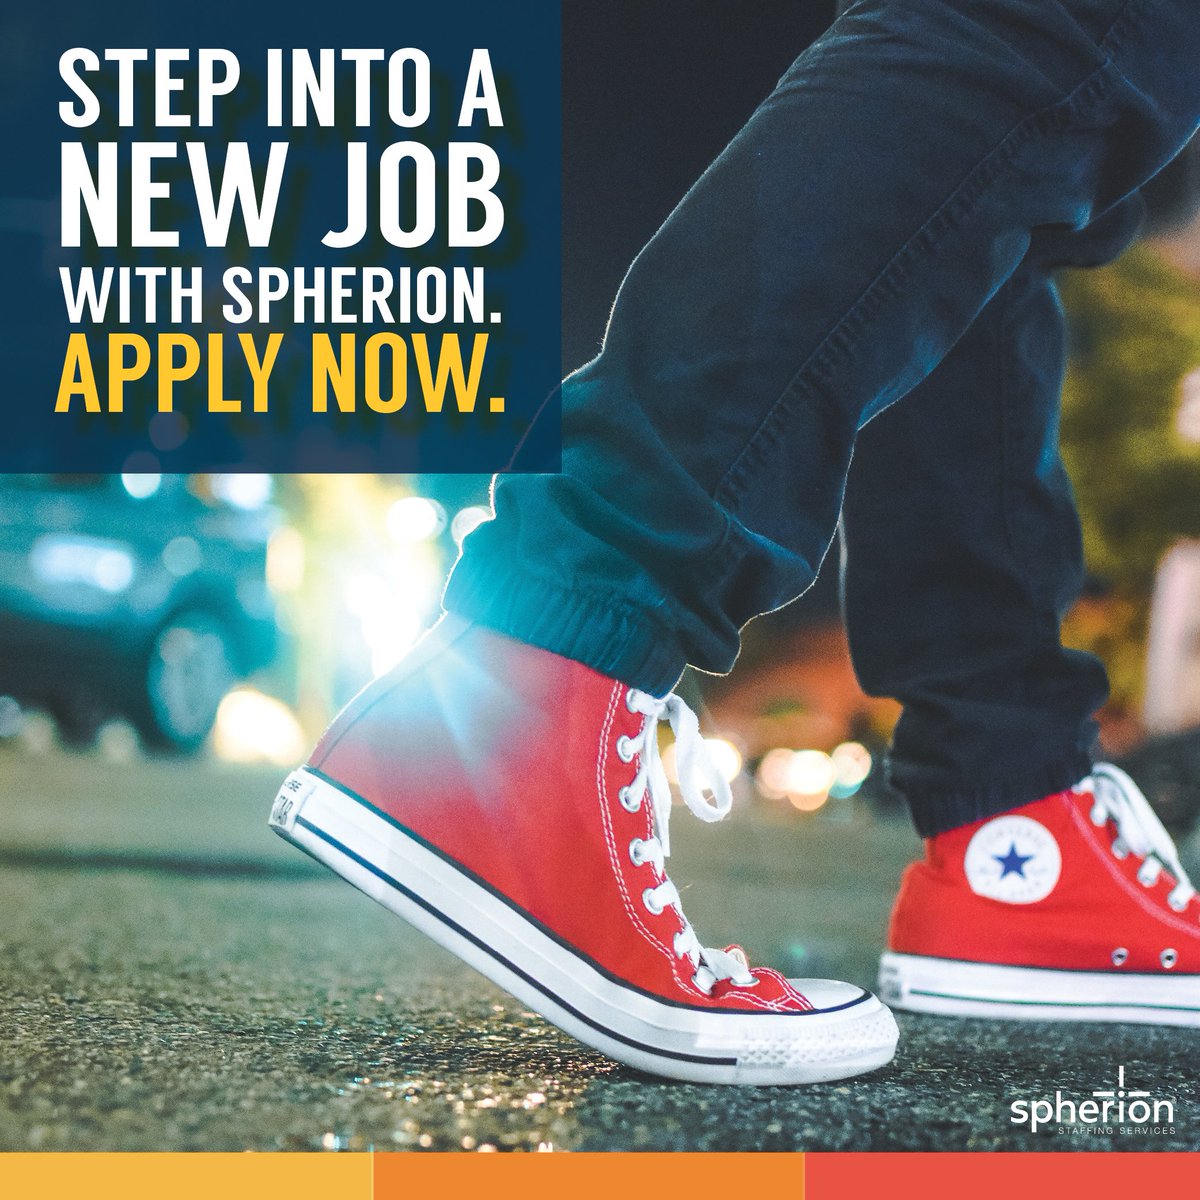 STEP INTO A NEW JOB WITH SPHERION.
Learn more and apply here: bit.ly/2nD501t
#newjob #jobfair #jobinterivew #workwithspherion 
**CLOSED MONDAY FOR LABOR DAY**
OPEN INTERVIEWS: Tuesday 9/4 & Thursday 9/6 | 9AM - 11AM
 📍1710 Citrus Blvd.Suite 1 & 2 Leesburg, FL 34748